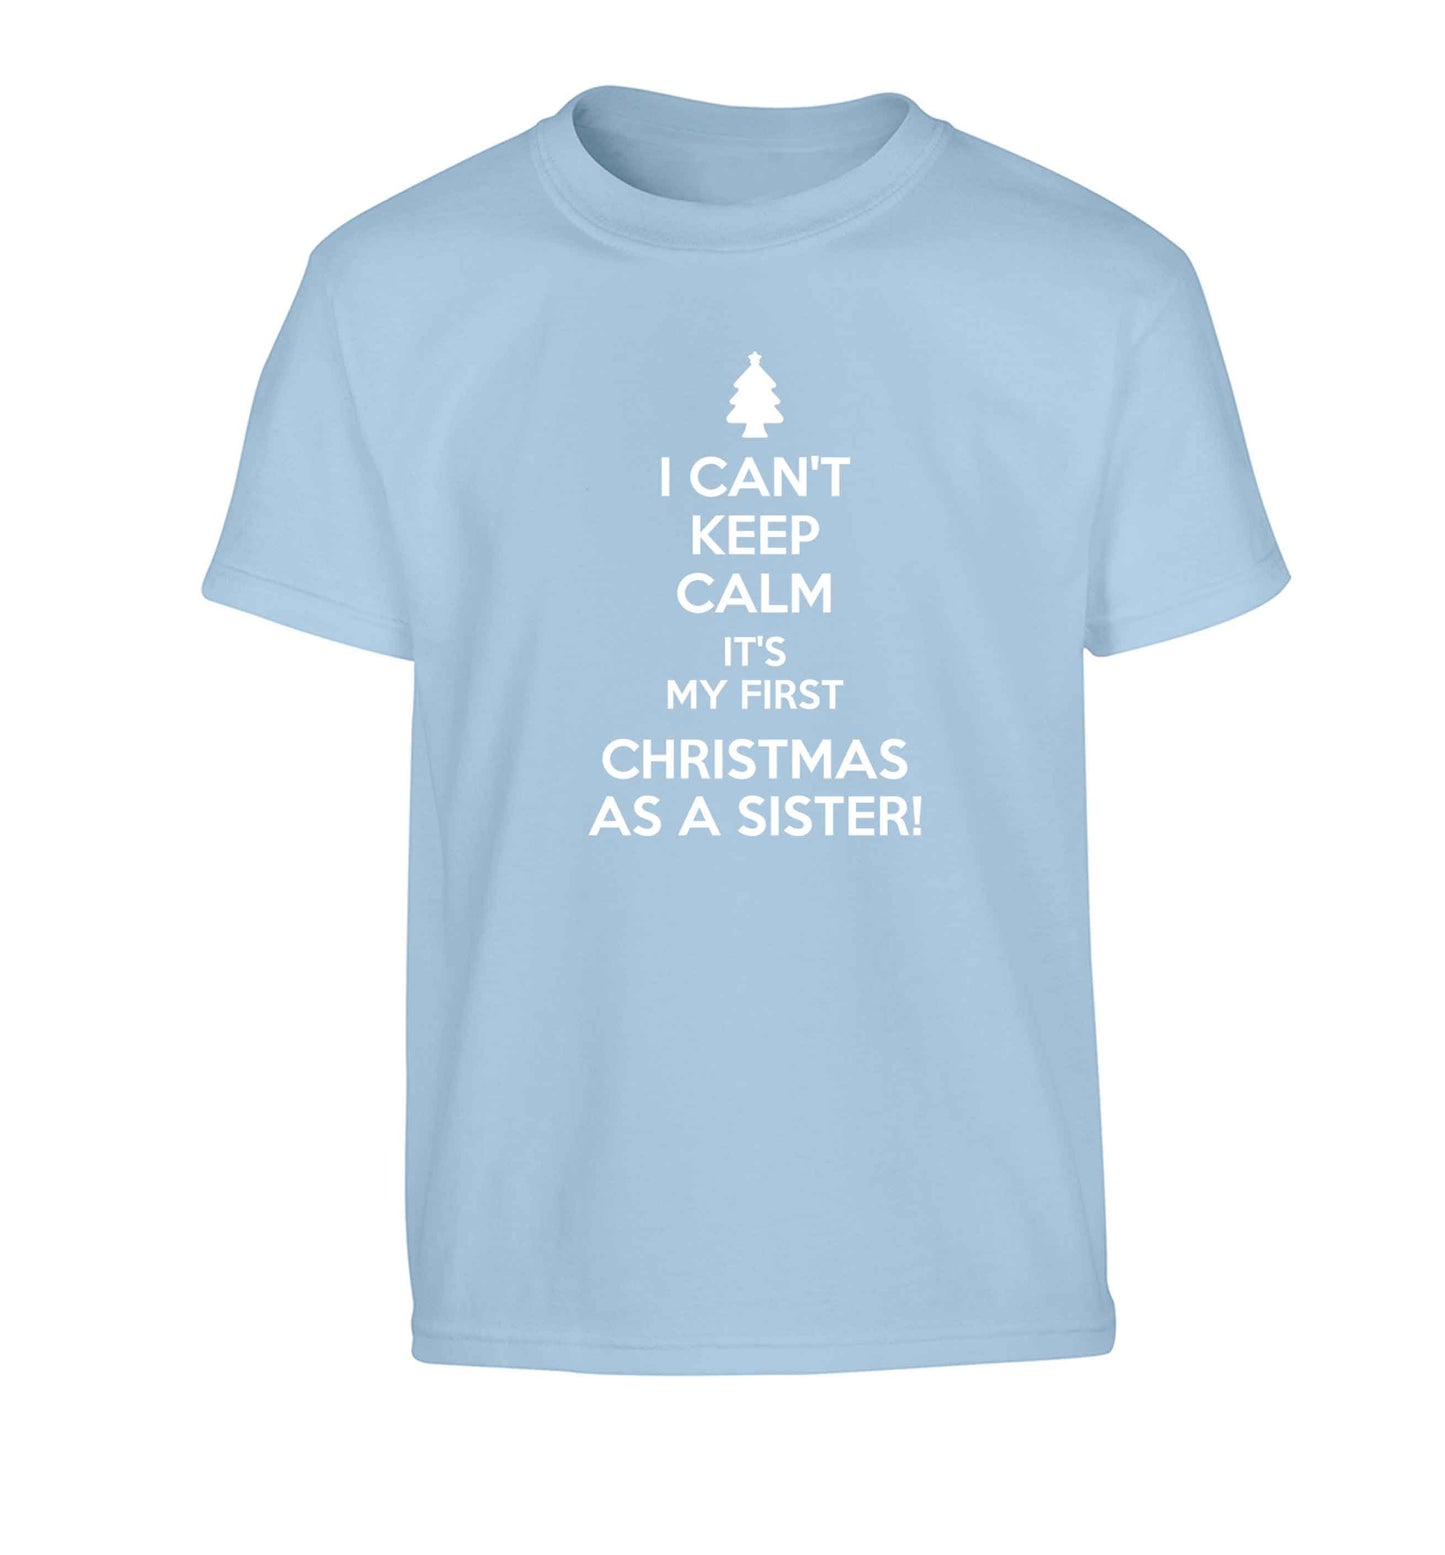 I can't keep calm it's my first Christmas as a sister! Children's light blue Tshirt 12-13 Years